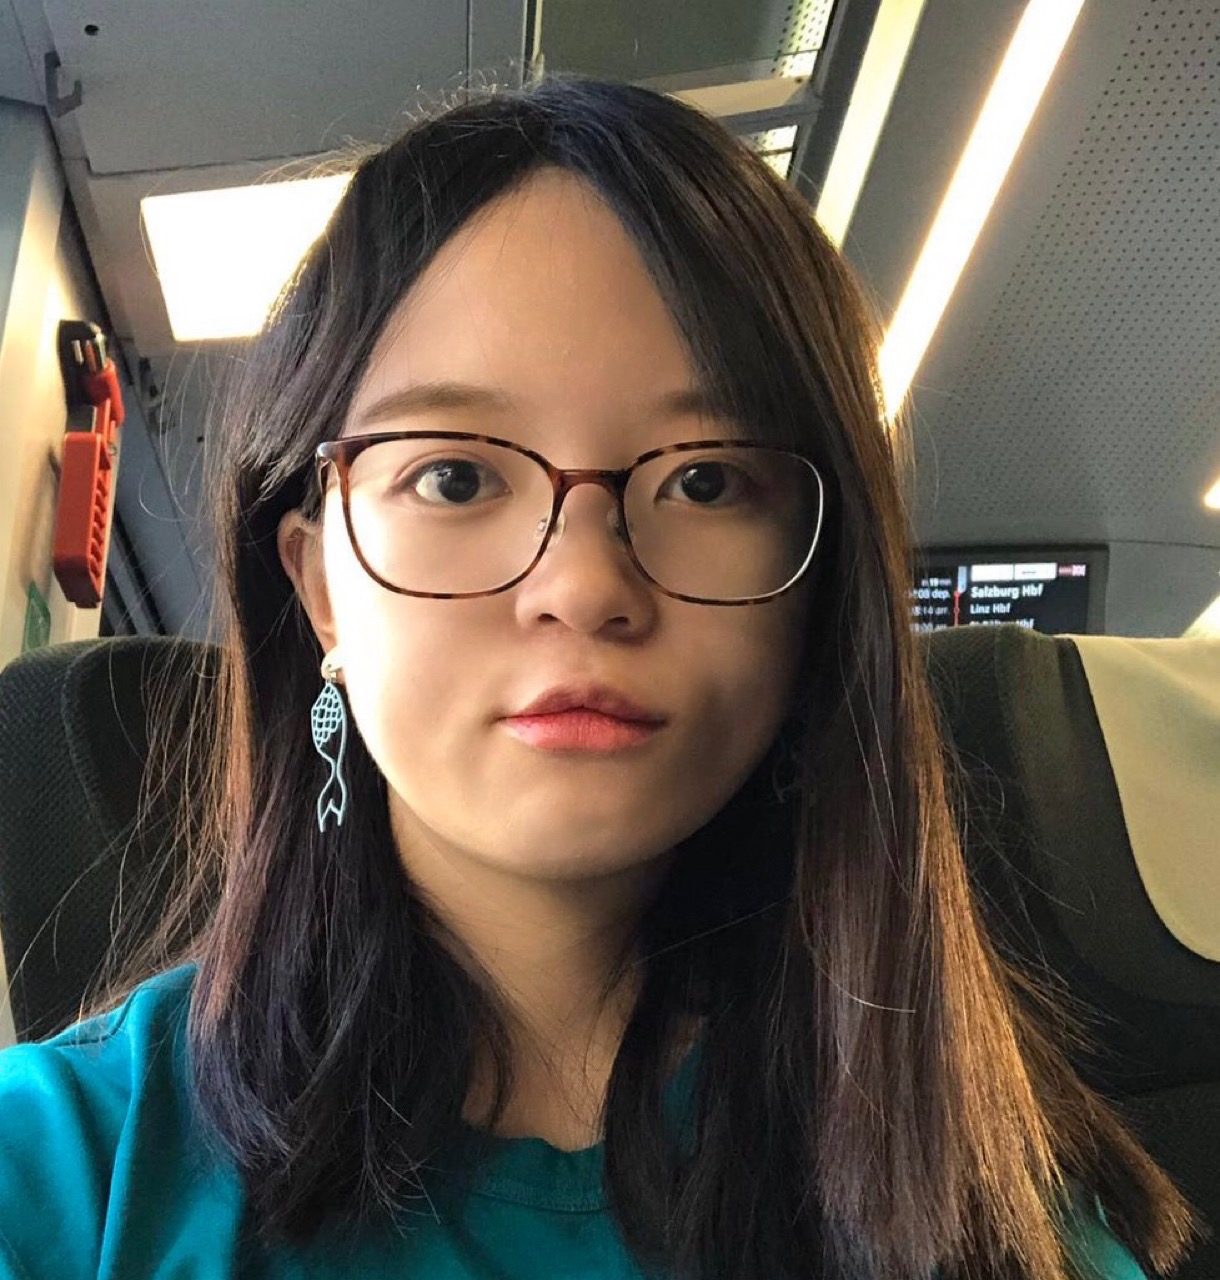 a Chinese female with glasses, long hair, and a green T-shirt